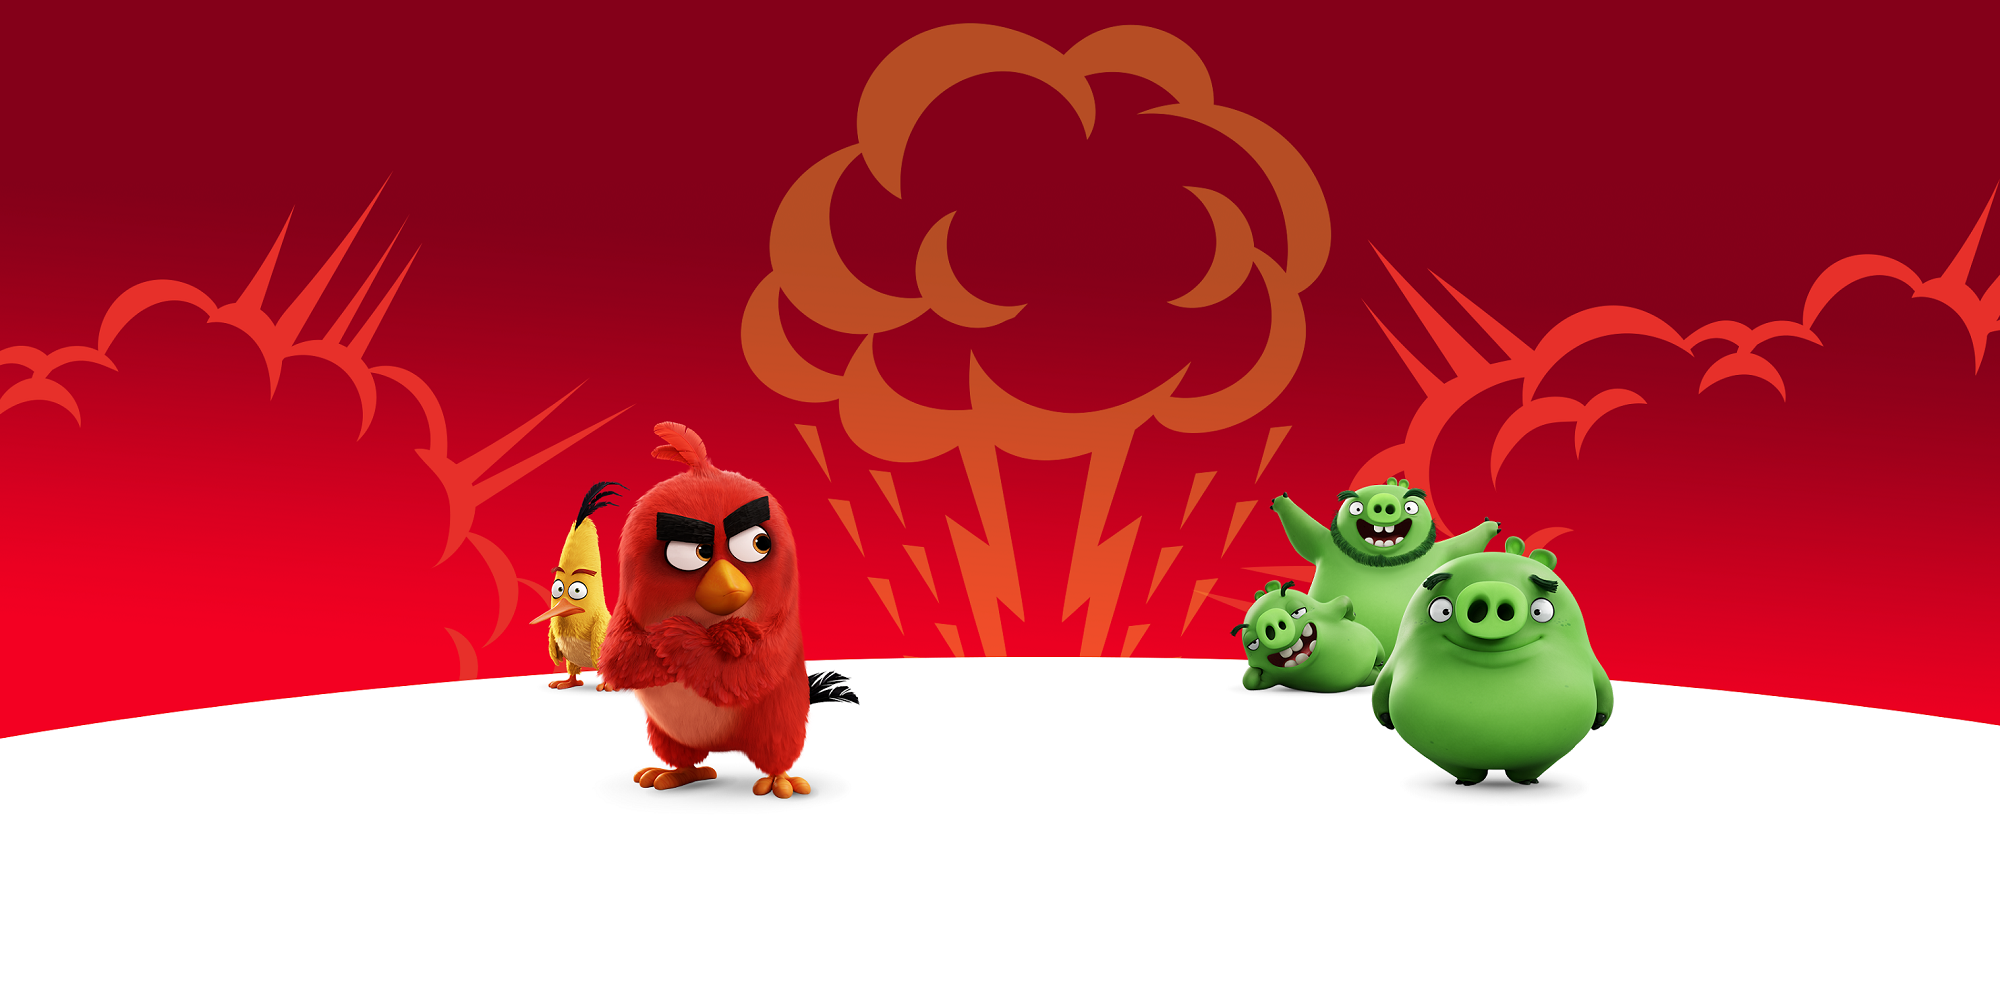 Image for Playtika's deal to acquire Rovio has come to an end